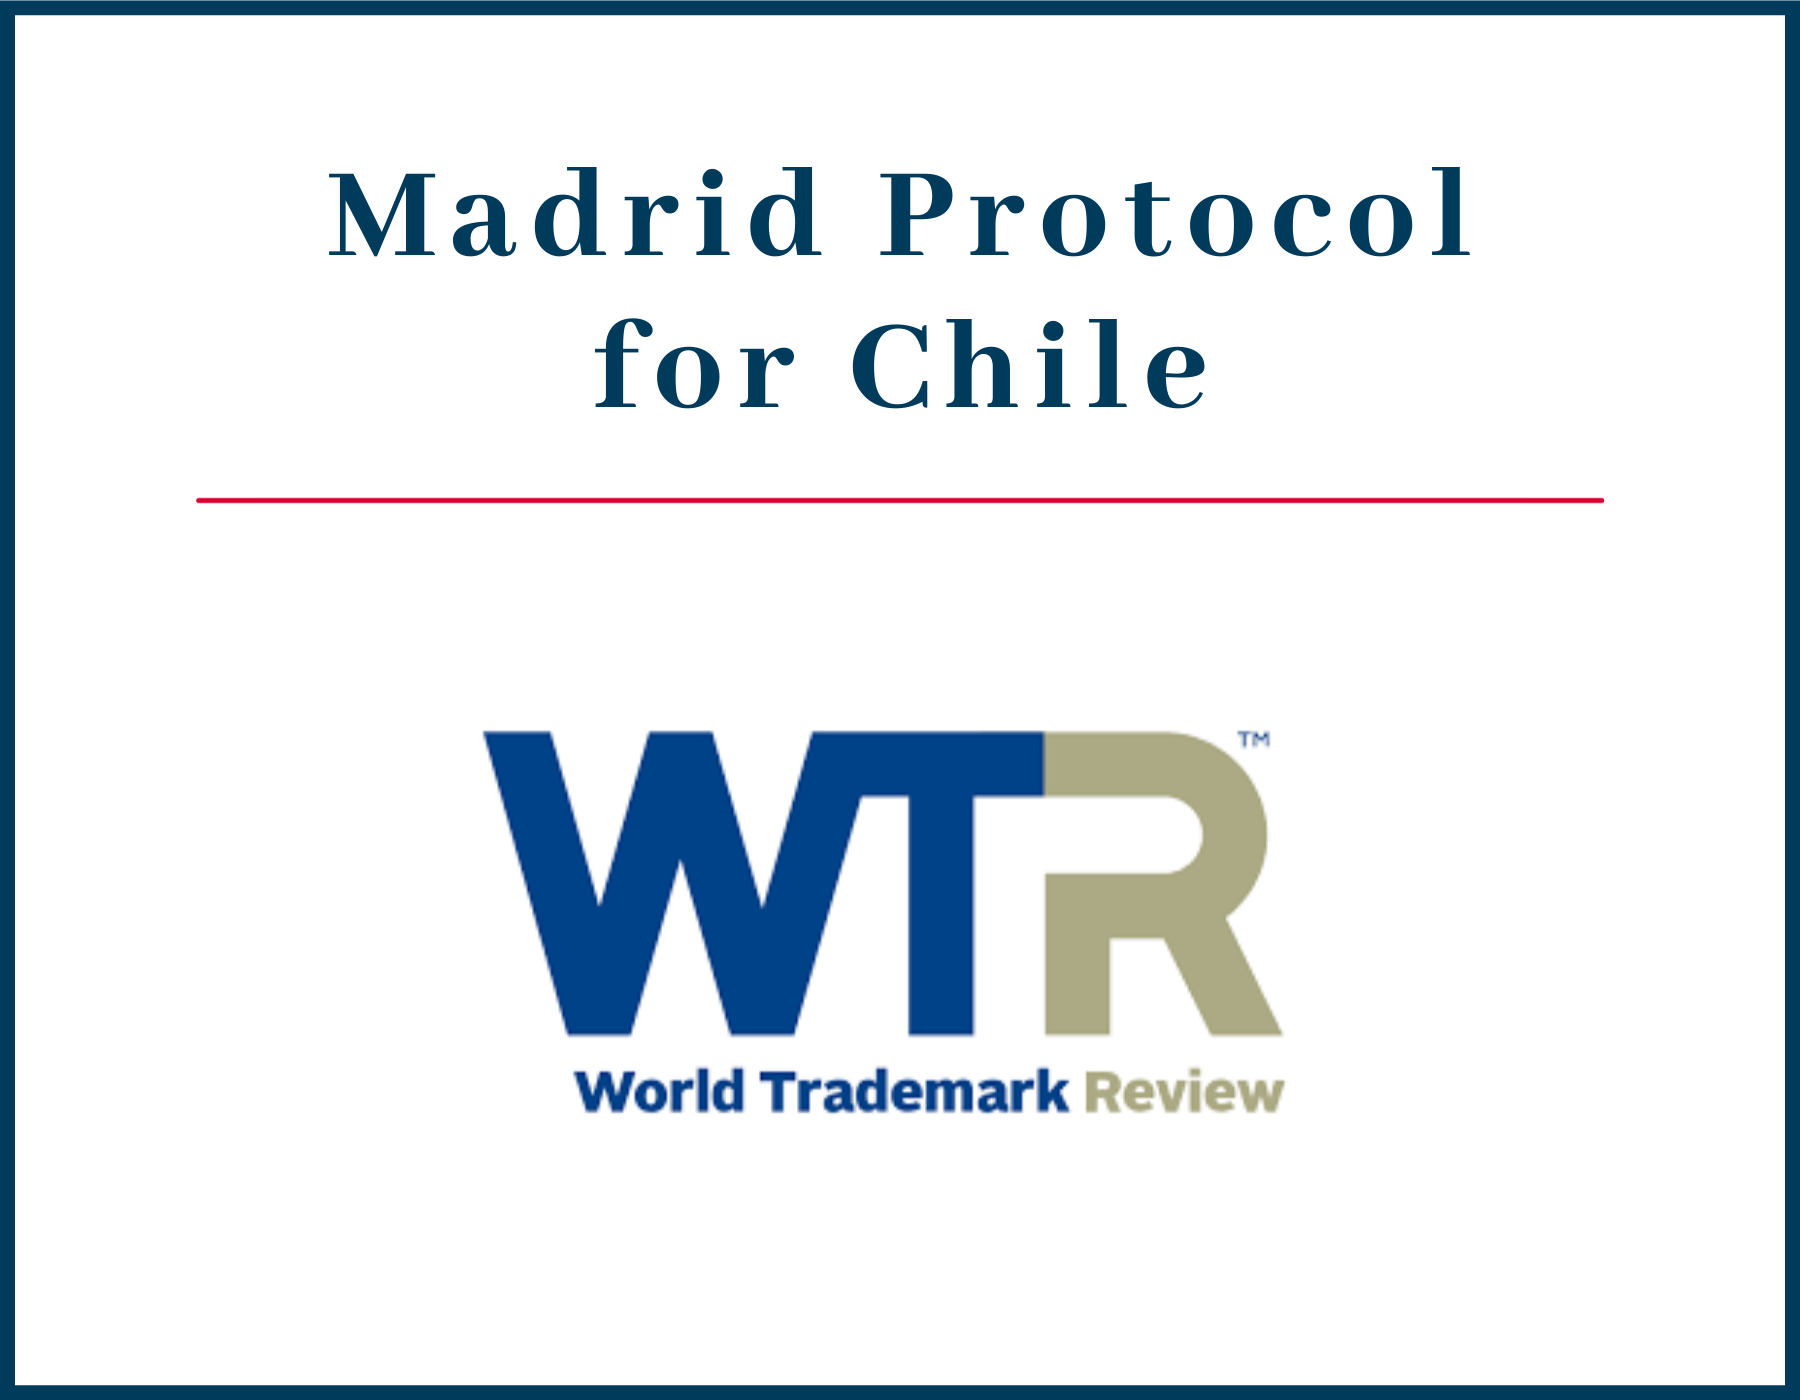 Sofia Covarrubias commented for World Trademark Review in “We are not sure that the time is right: professionals are questioning Chile’s decision to approve the Madrid Protocol”.